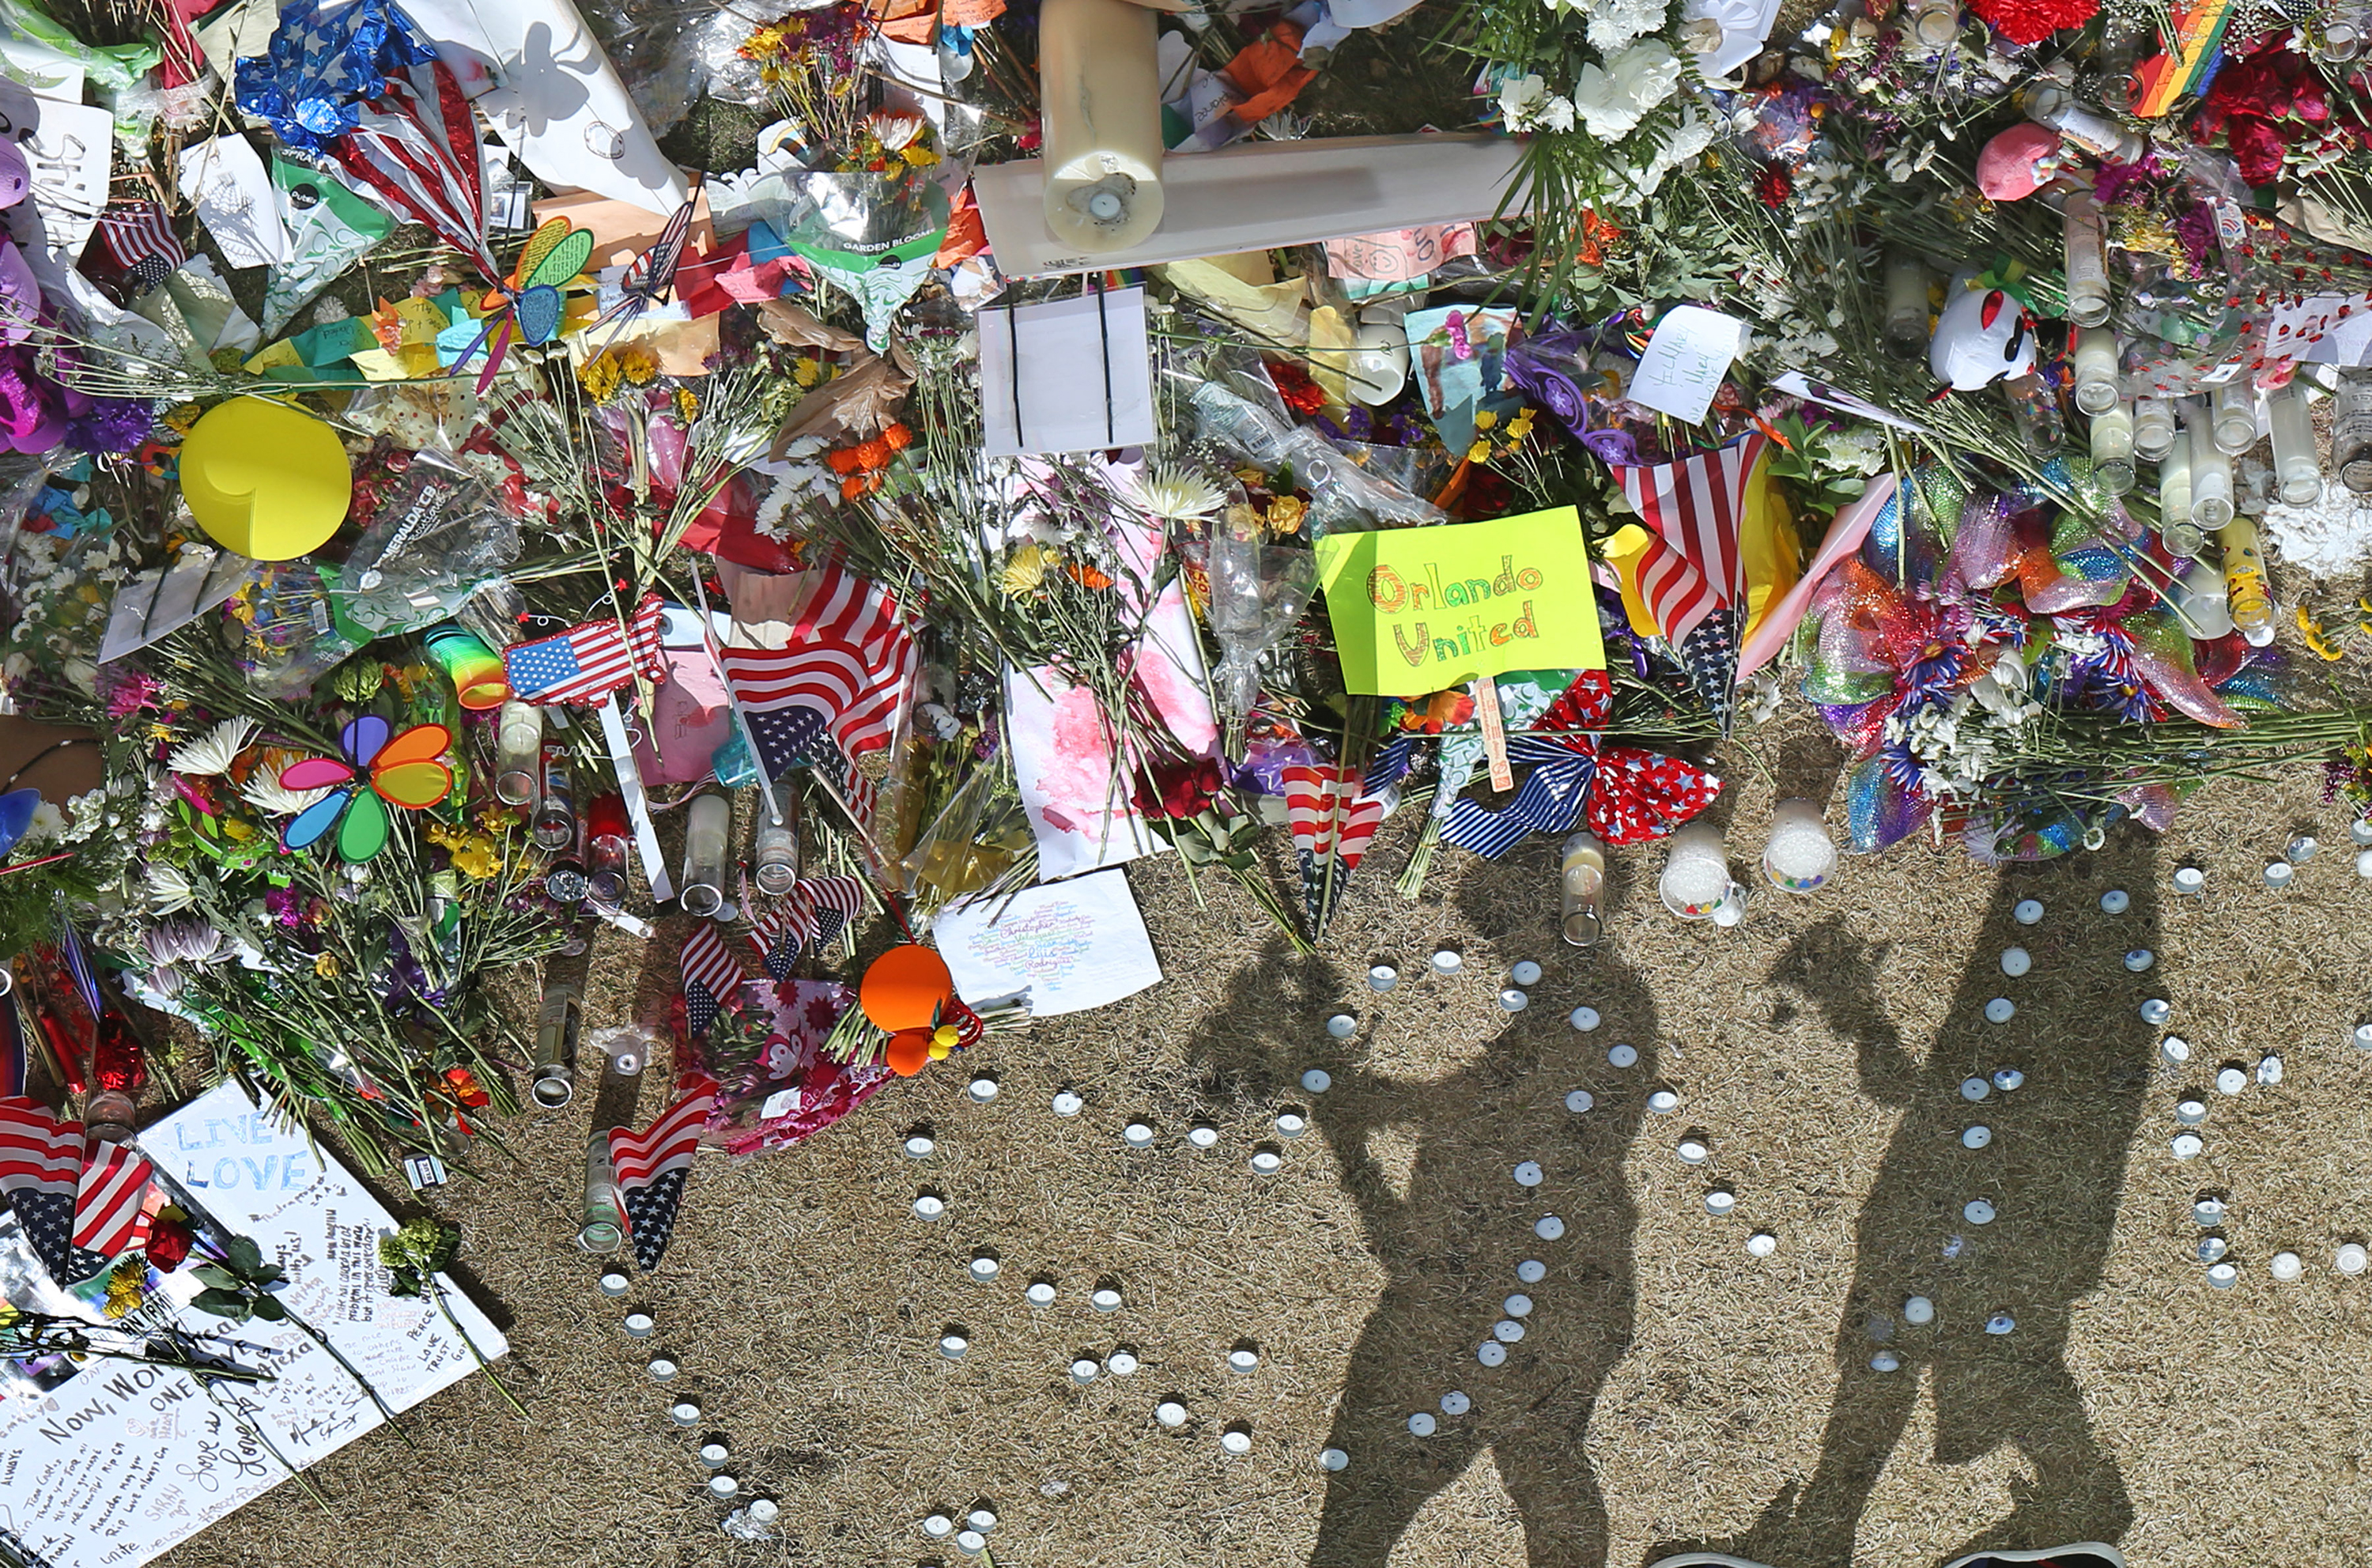 People pay their respects to an ever growing makeshift memorial at the Dr. Phillips Center for the Performing Arts in Orlando, Fla., on Monday, June 20, 2016, just north of the Pulse nightclub shooting scene where 49 people were killed. Orlando Sentinel&mdash;TNS via Getty Images (Orlando Sentinel&mdash;TNS via Getty Images)